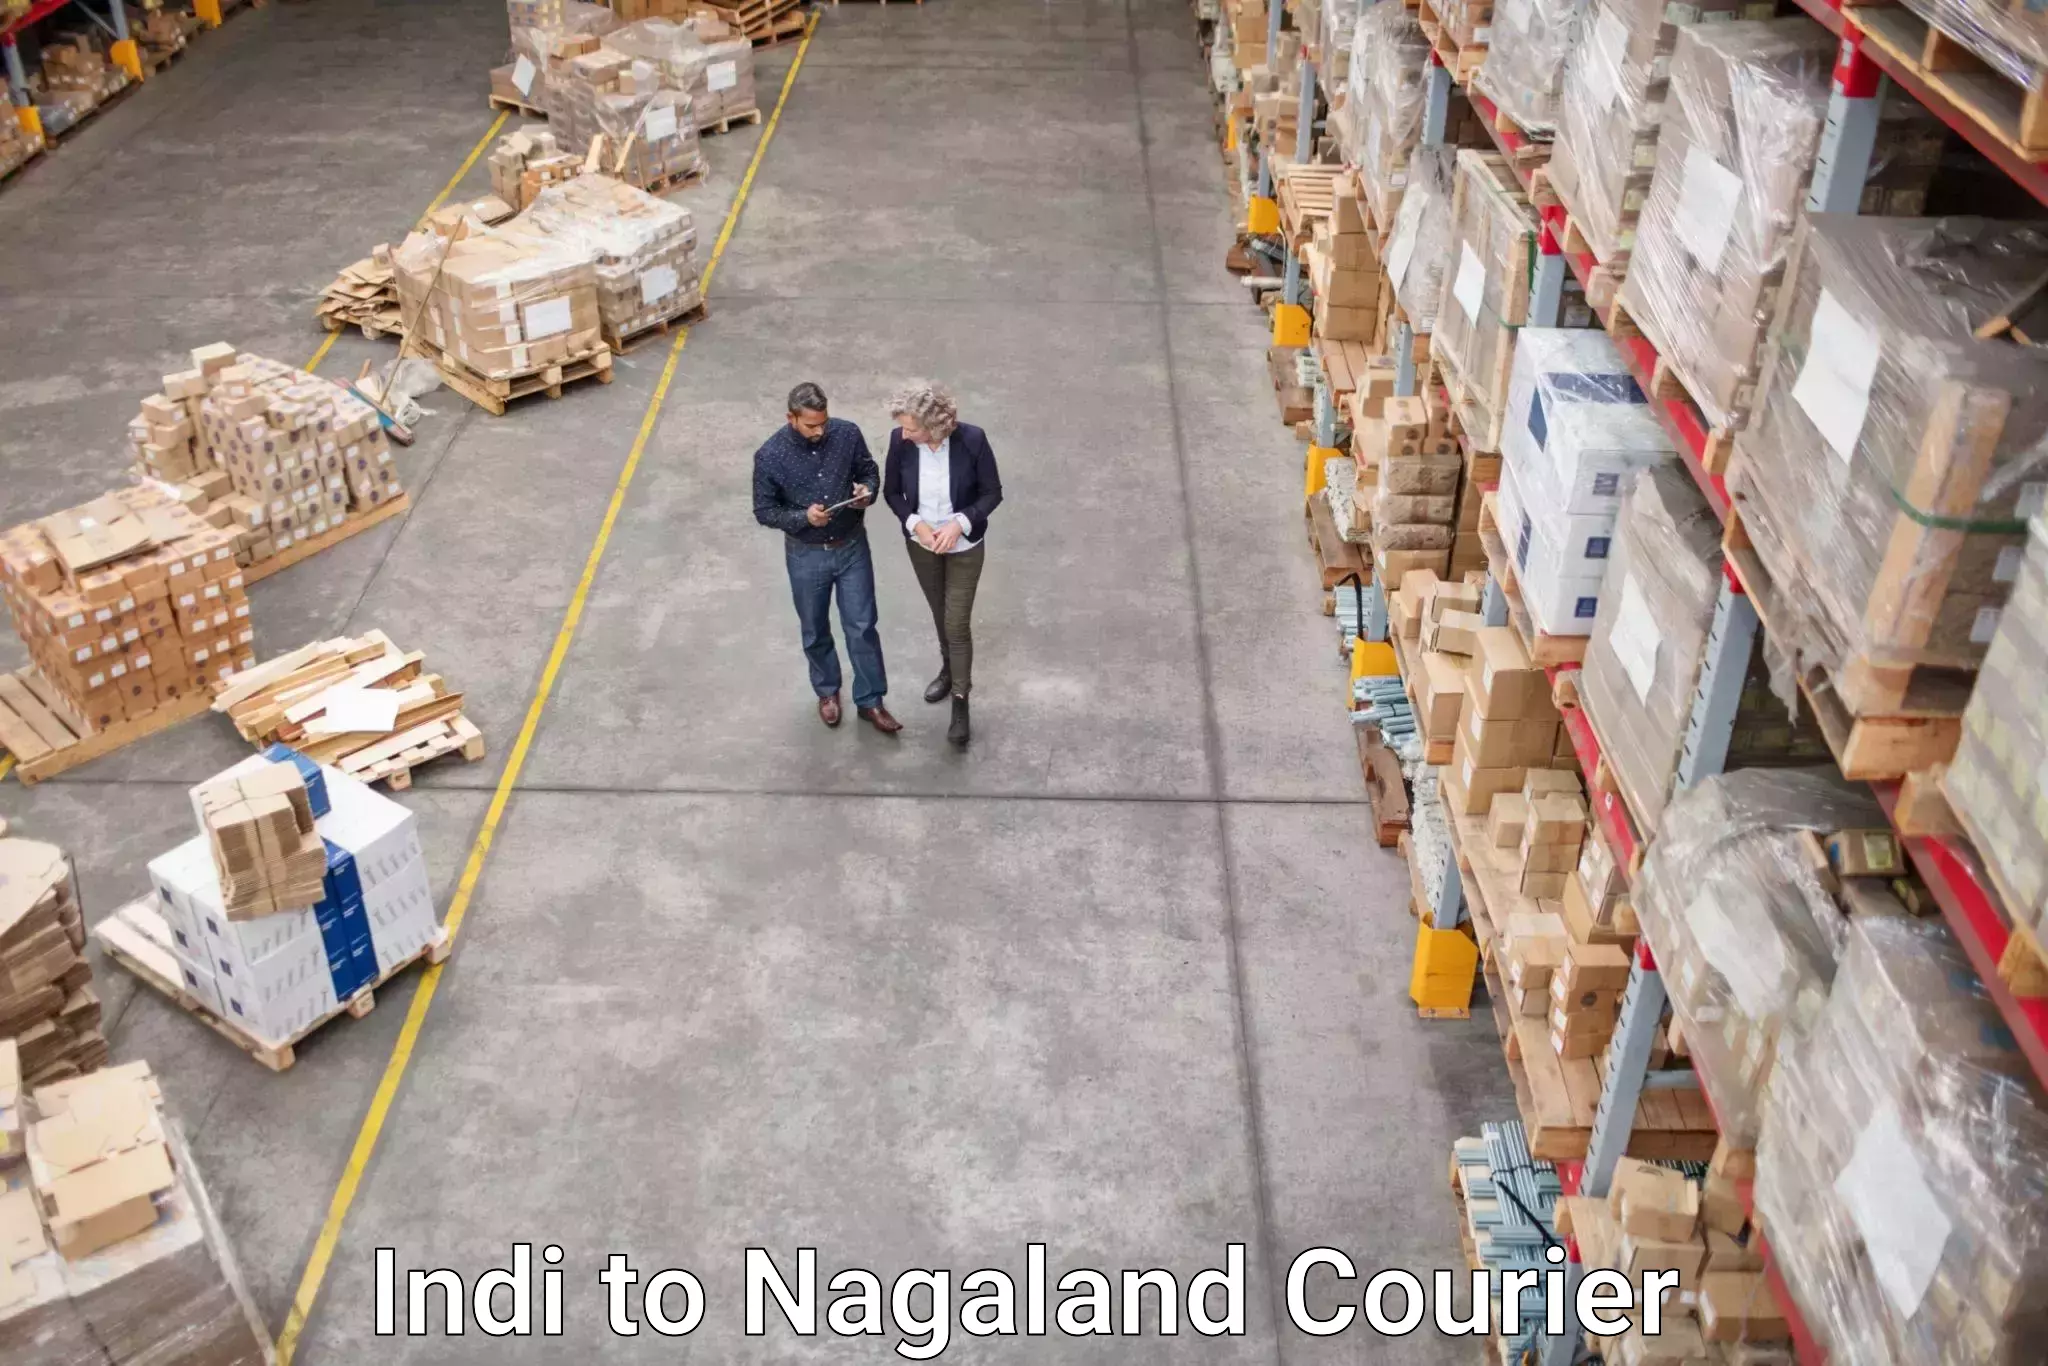 Lightweight parcel options Indi to Nagaland